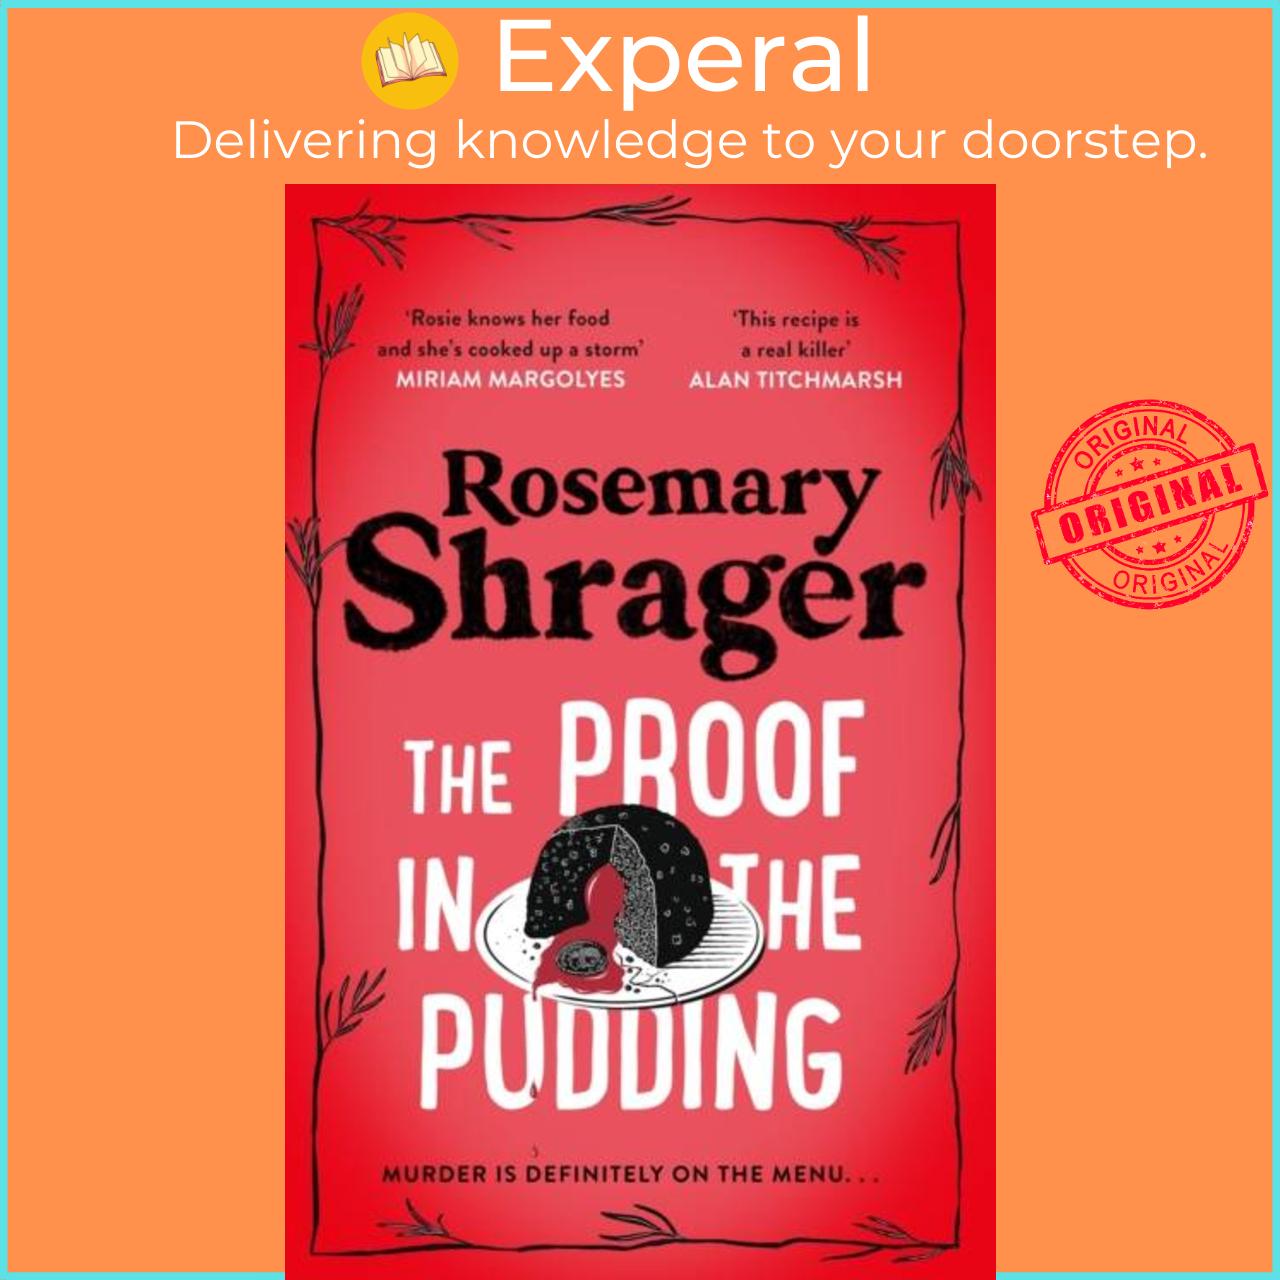 Sách - The Proof in the Pudding - Prudence Bulstrode 2 by Rosemary Shrager (UK edition, hardcover)